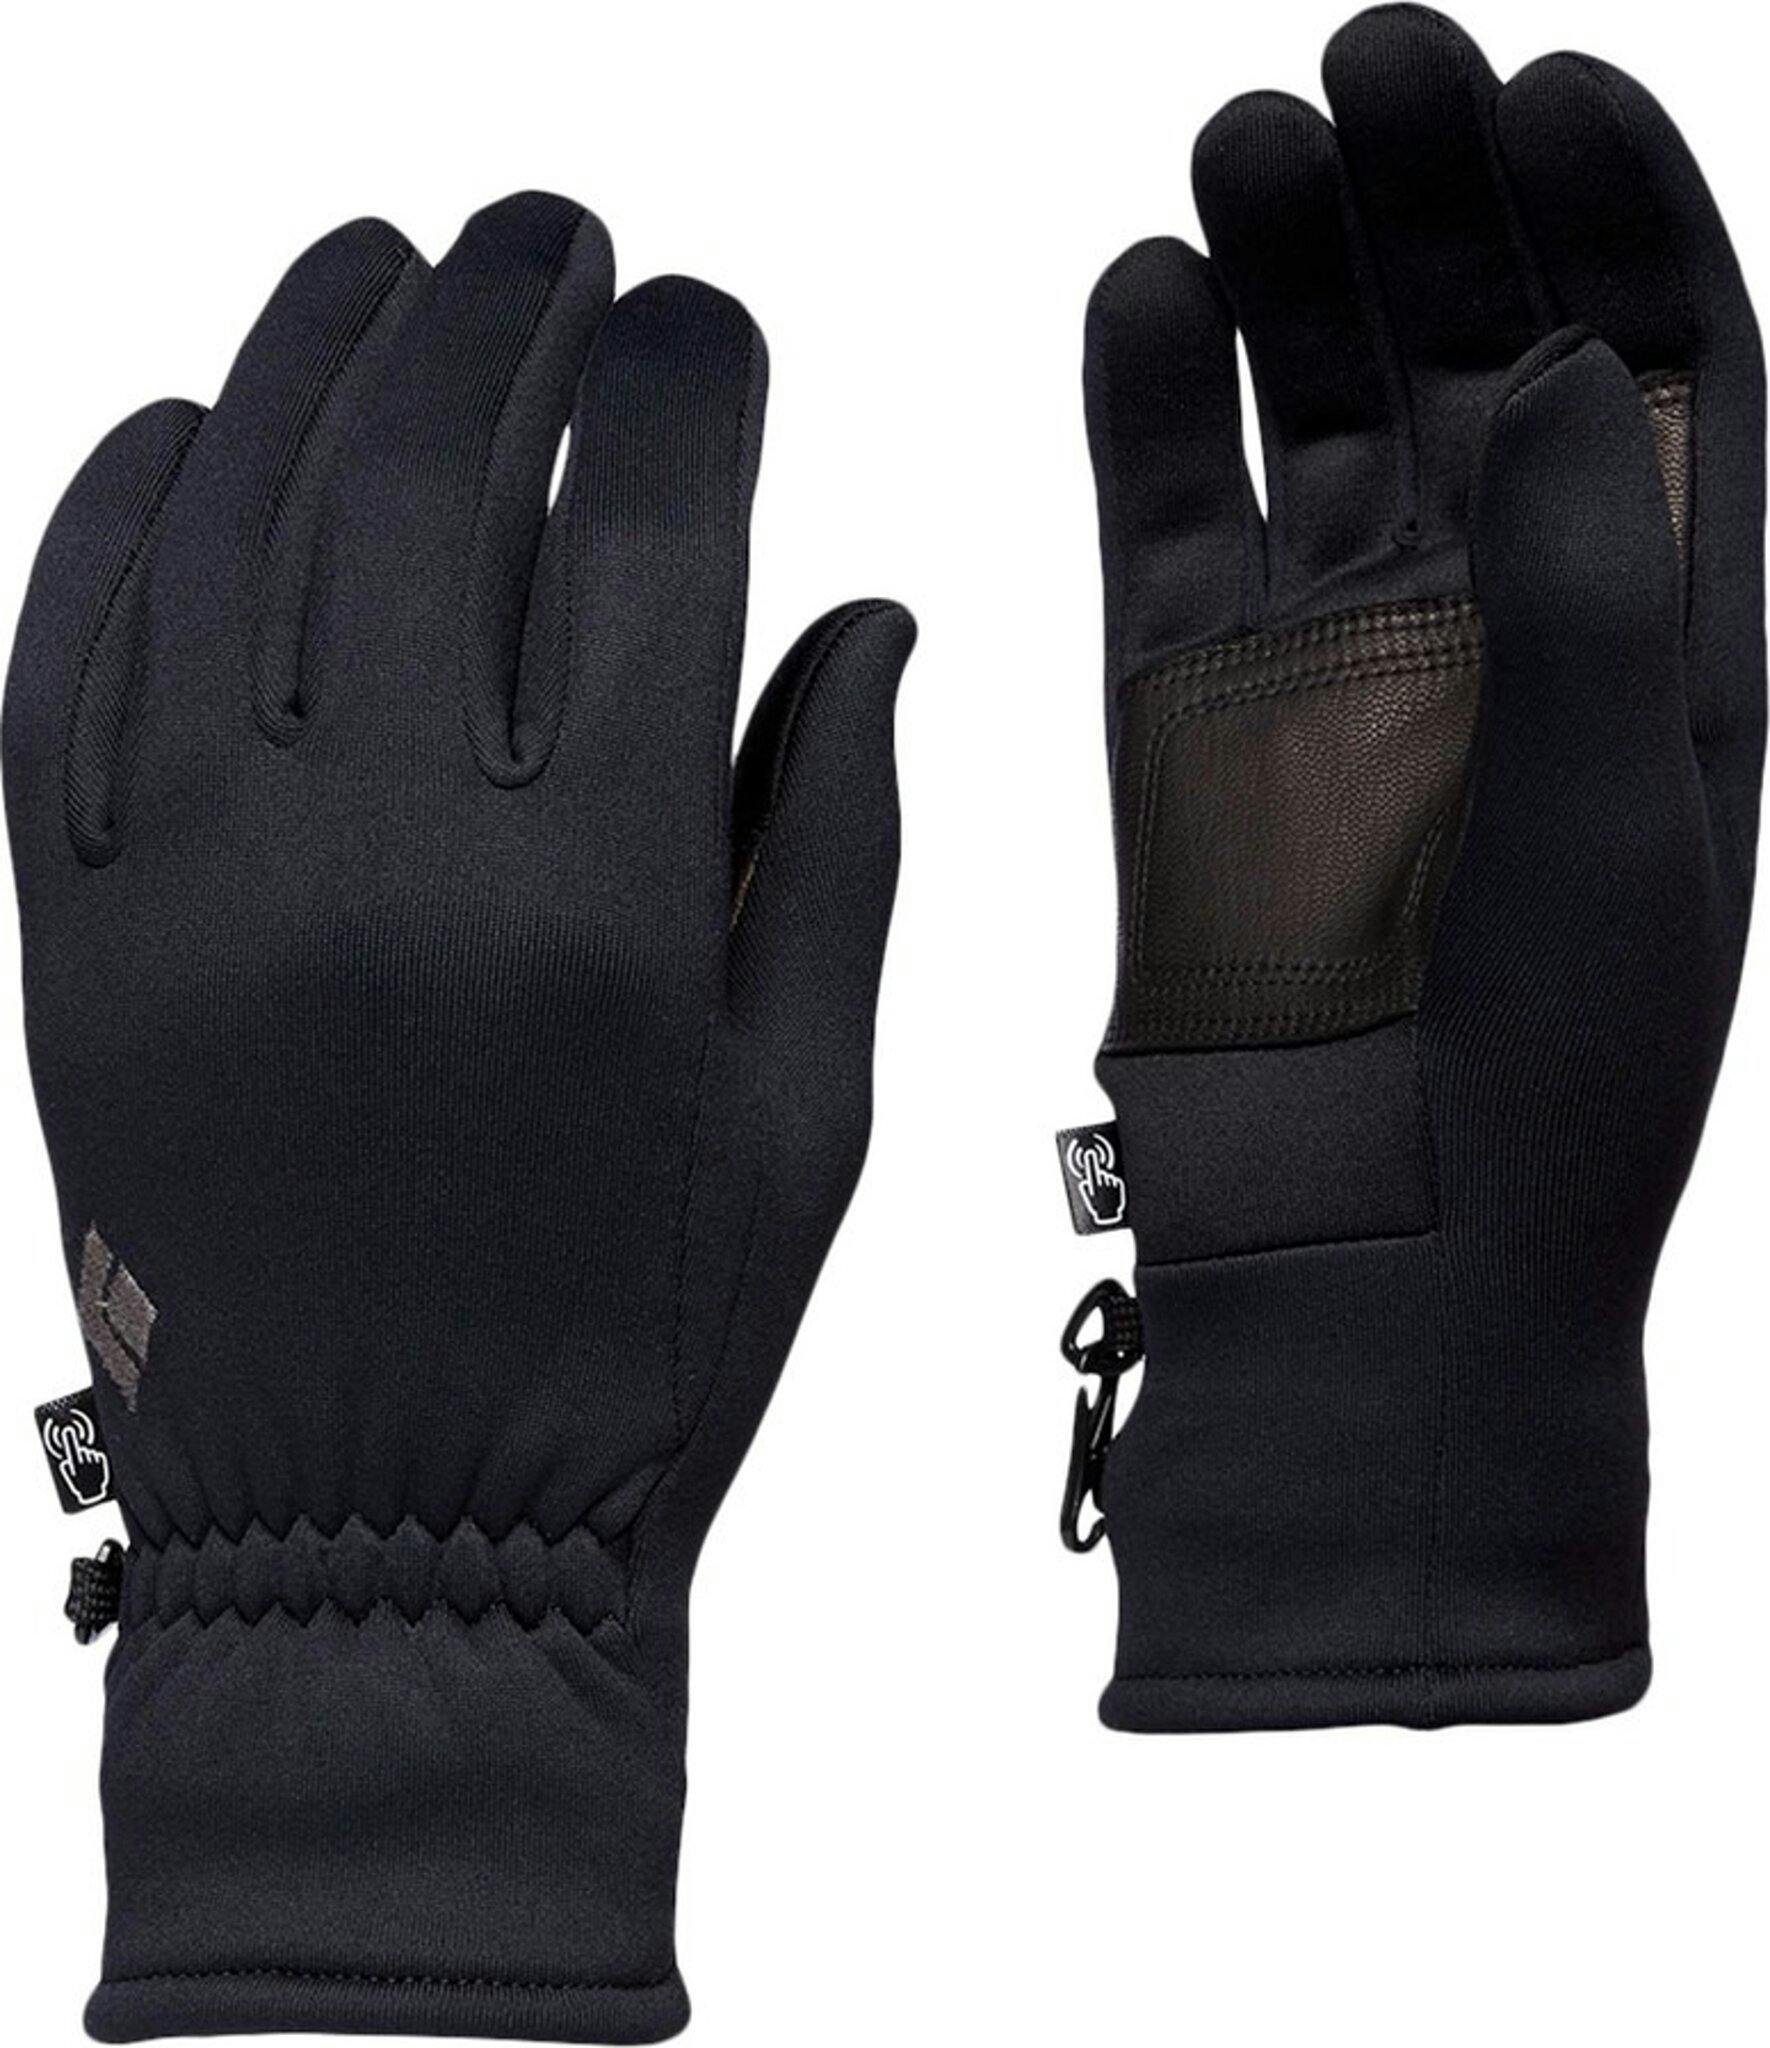 Product image for Heavyweight Screentap Gloves - Unisex